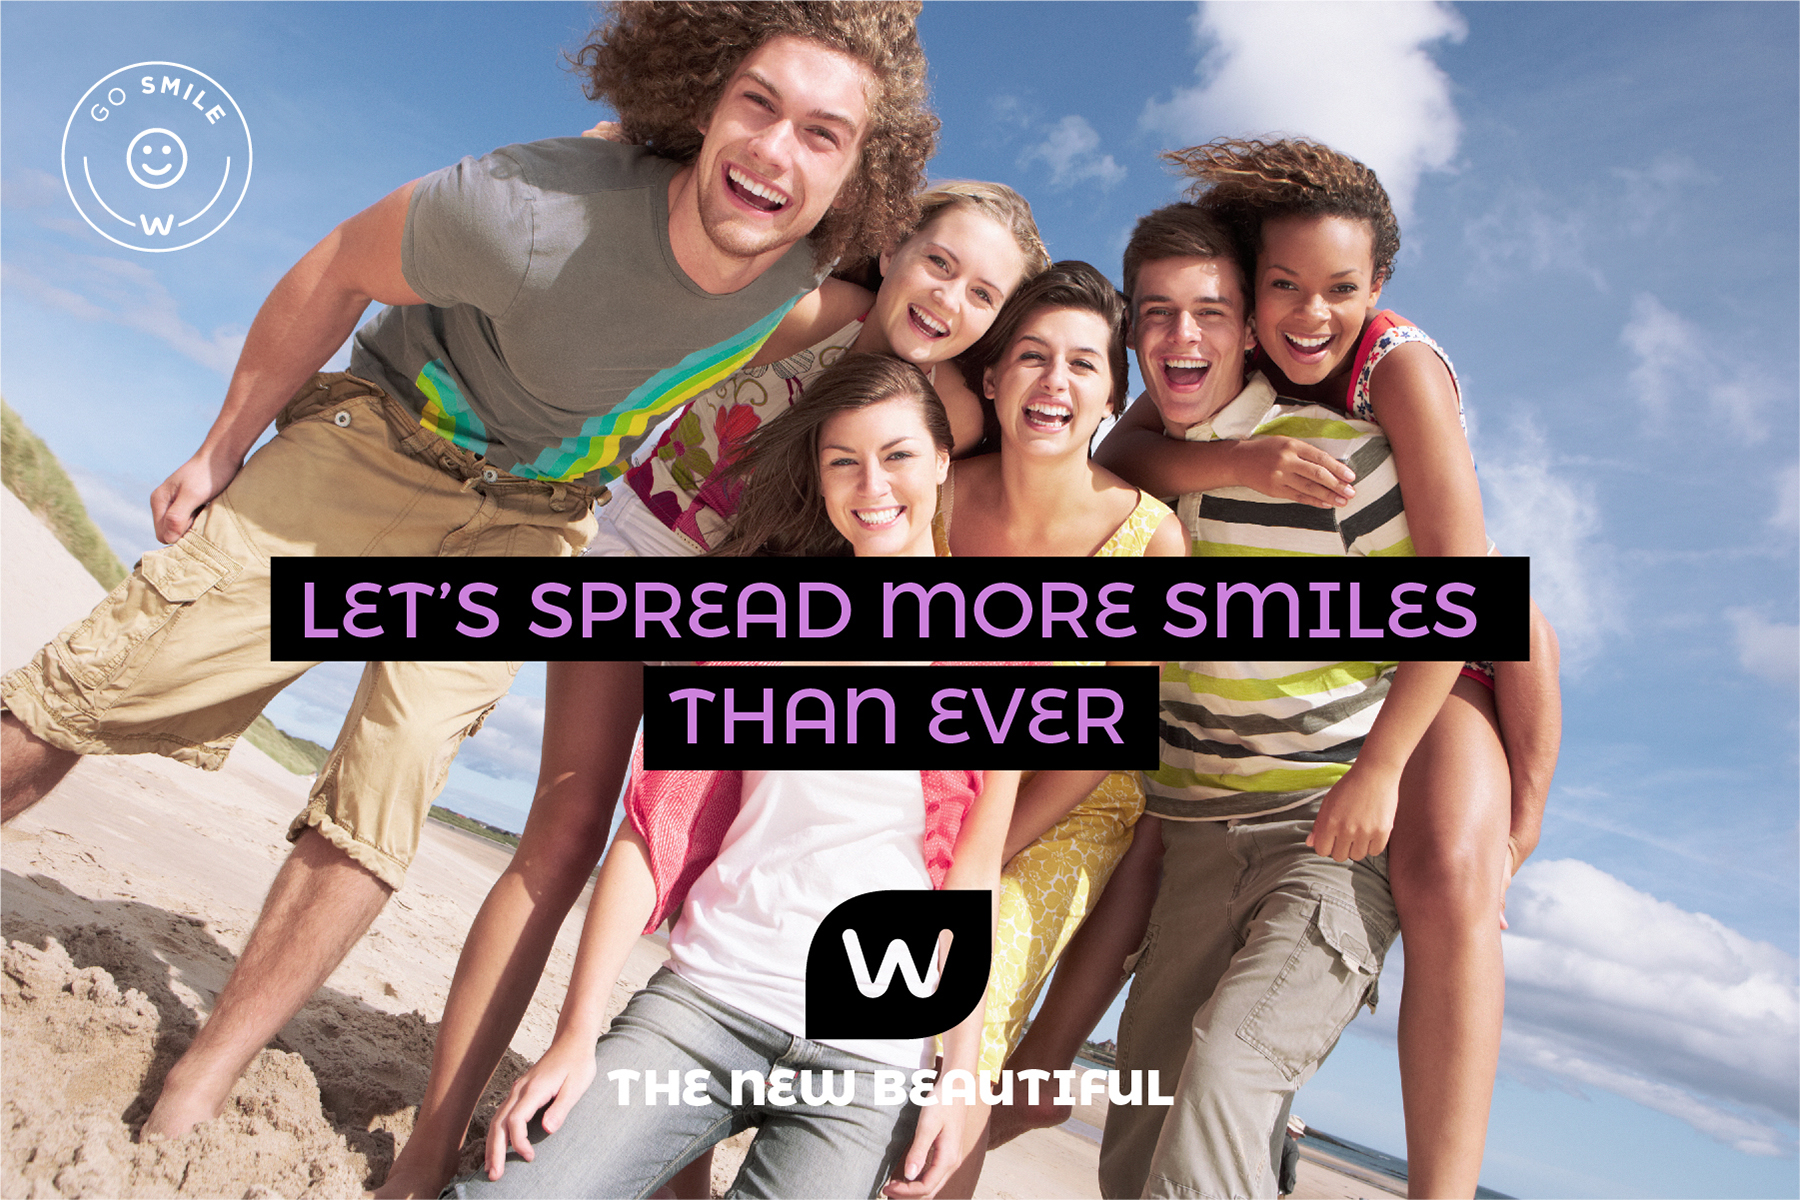 The New Beautiful - Let's spread more smiles than ever